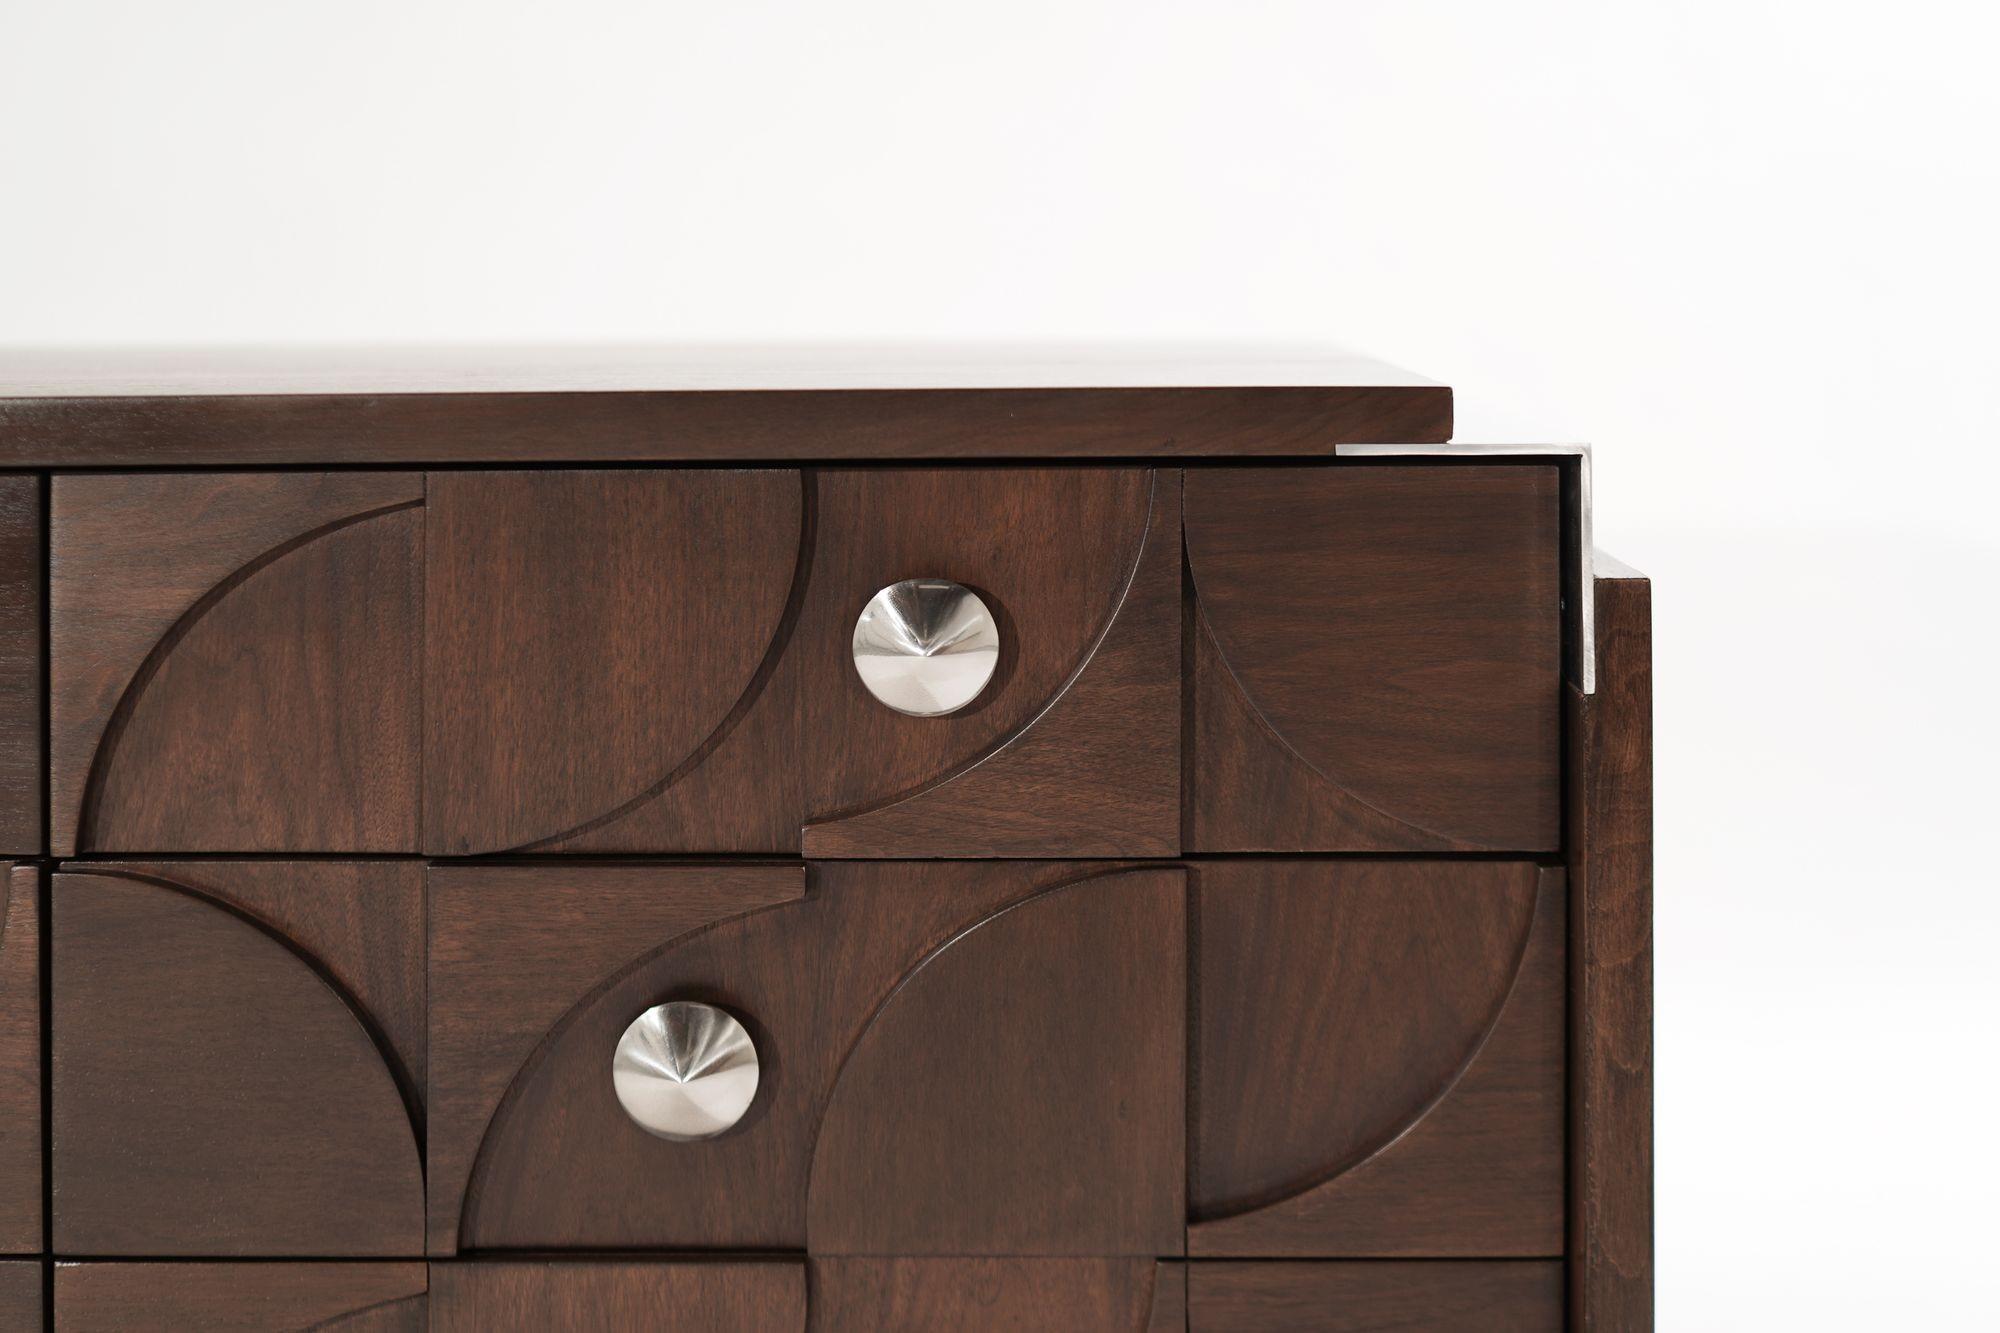 Brutalist Walnut Dresser with Nickel Accents, C. 1960s For Sale 6